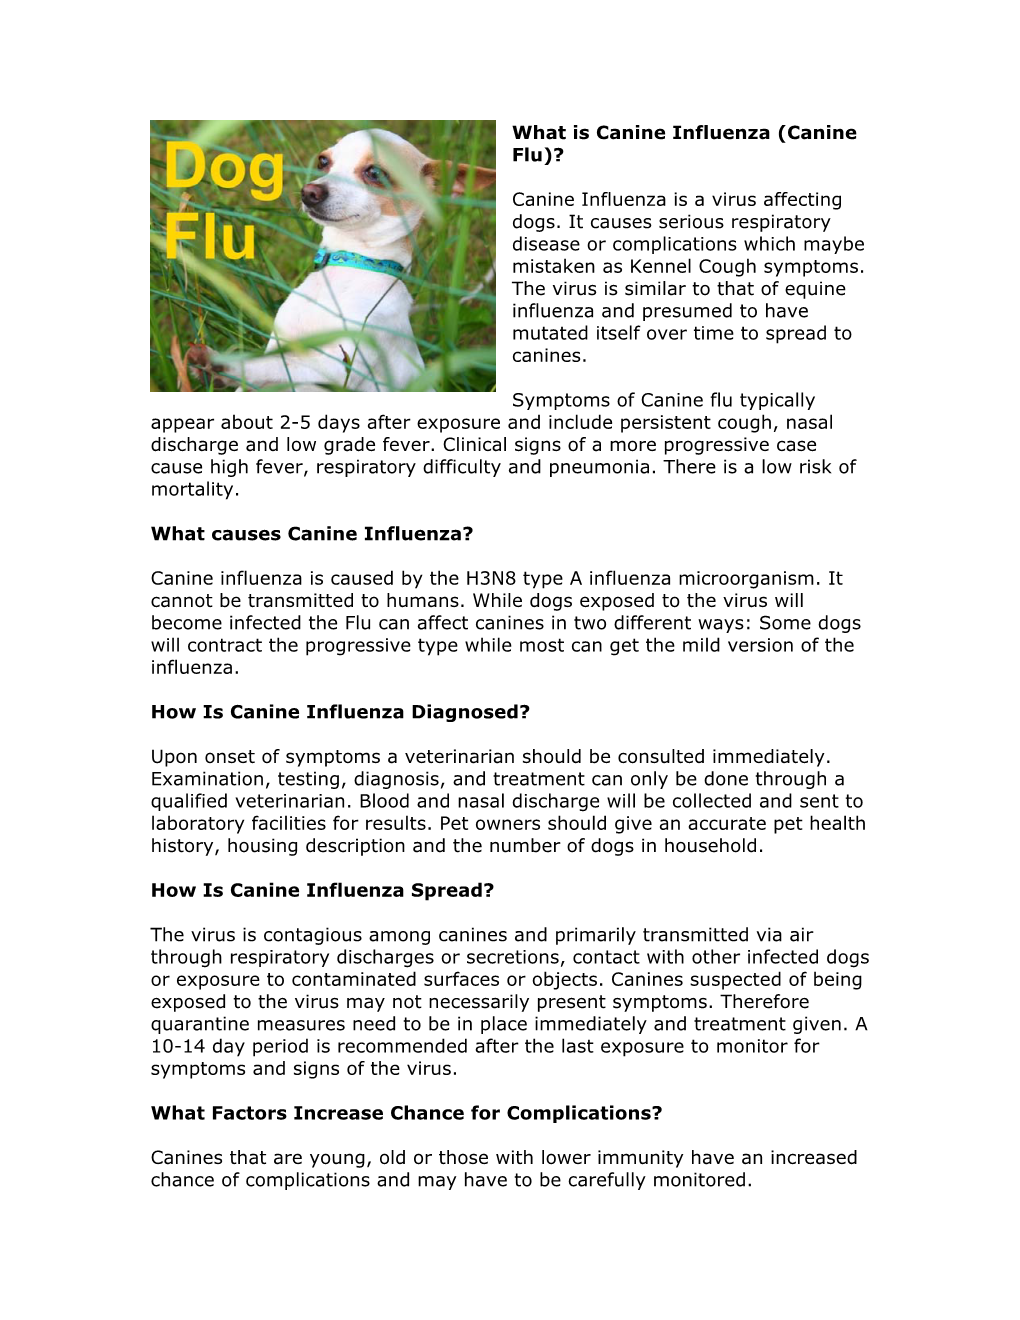 What Is Canine Influenza (Canine Flu)?